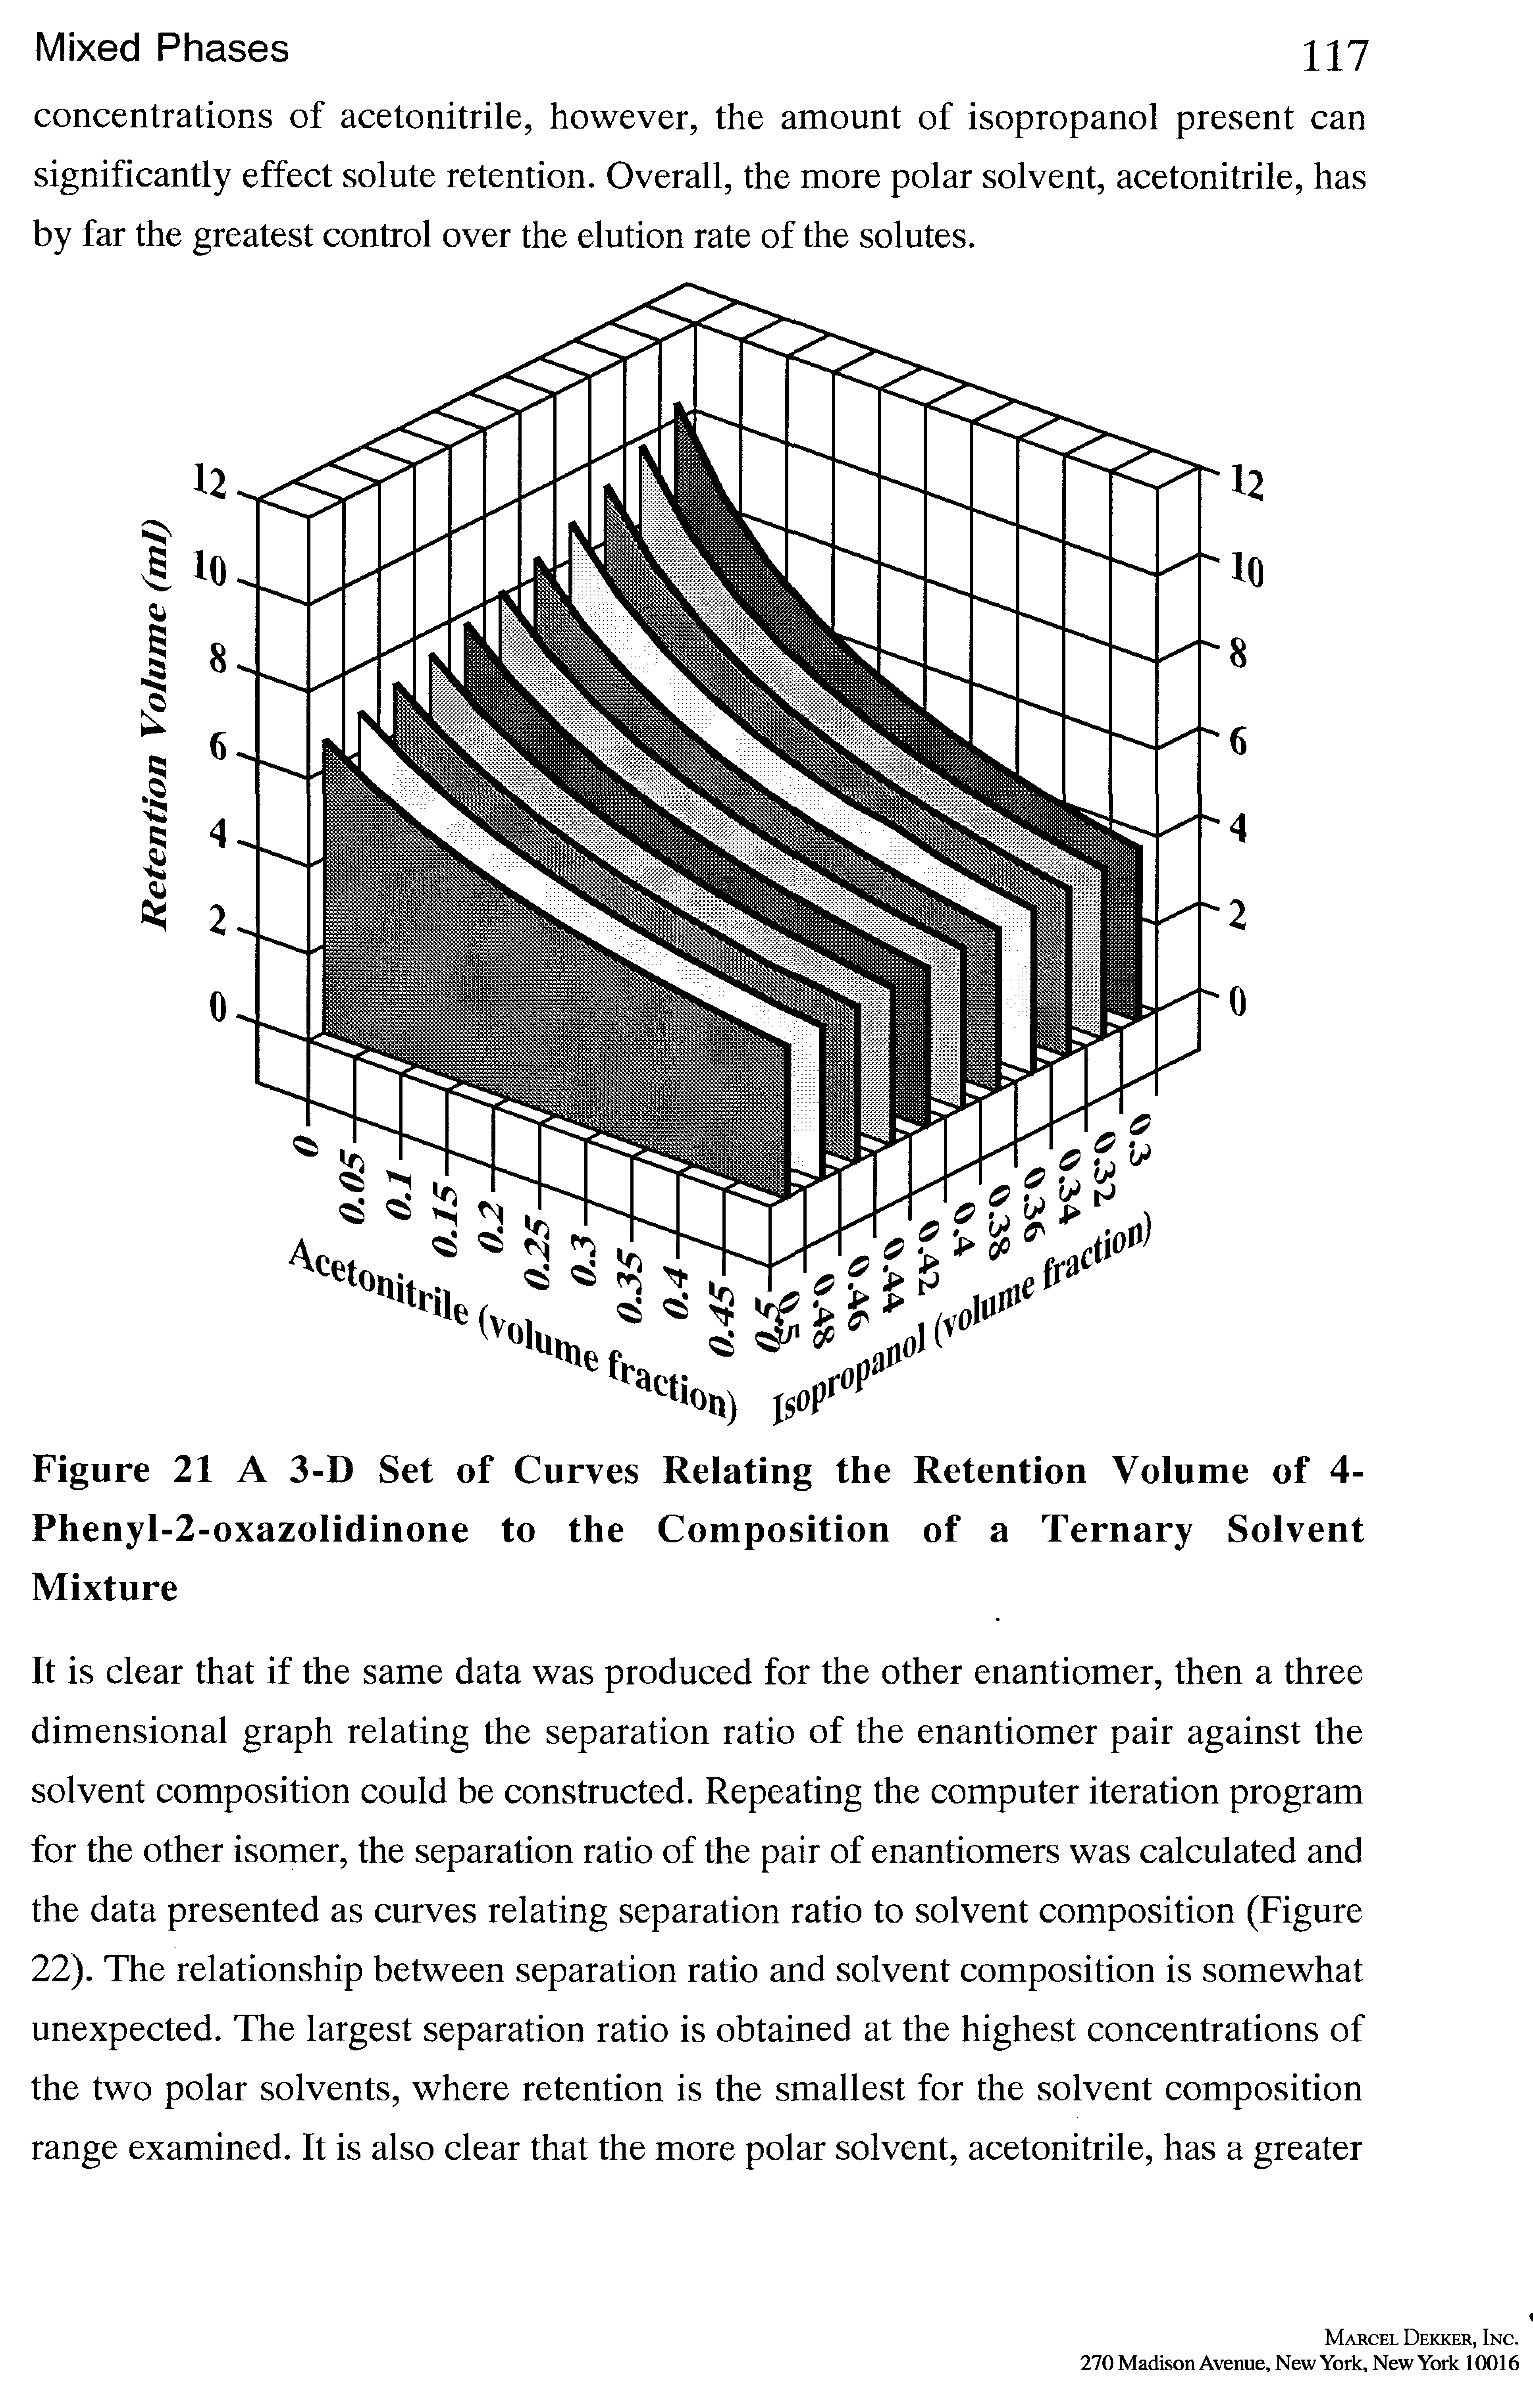 Figure 21 A 3-D Set of Curves Relating the Retention Volume of 4-Phenyl-2-oxazolidinone to the Composition of a Ternary Solvent Mixture...